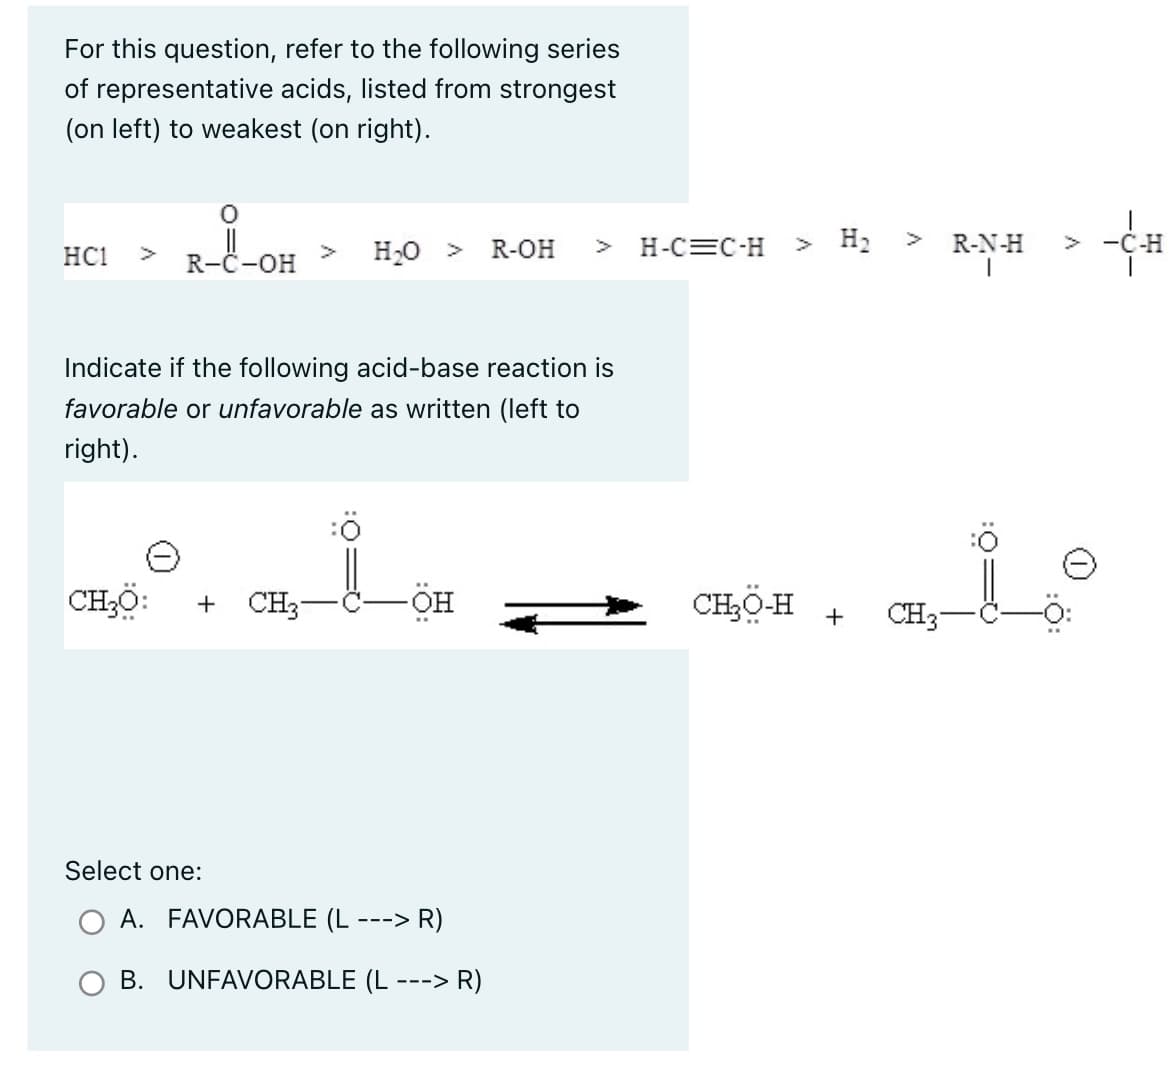 For this question, refer to the following series
of representative acids, listed from strongest
(on left) to weakest (on right).
HC1
0
R-C-OH
CHO:
Indicate if the following acid-base reaction is
favorable or unfavorable as written (left to
right).
+
Select one:
H₂O >
CH3
-ÖH
R-OH
A. FAVORABLE (L ---> R)
B. UNFAVORABLE (L-
---> R)
H-C=C-H
> H₂ >
CHO-H
+
R-N-H
> -C-H
is
CH3-